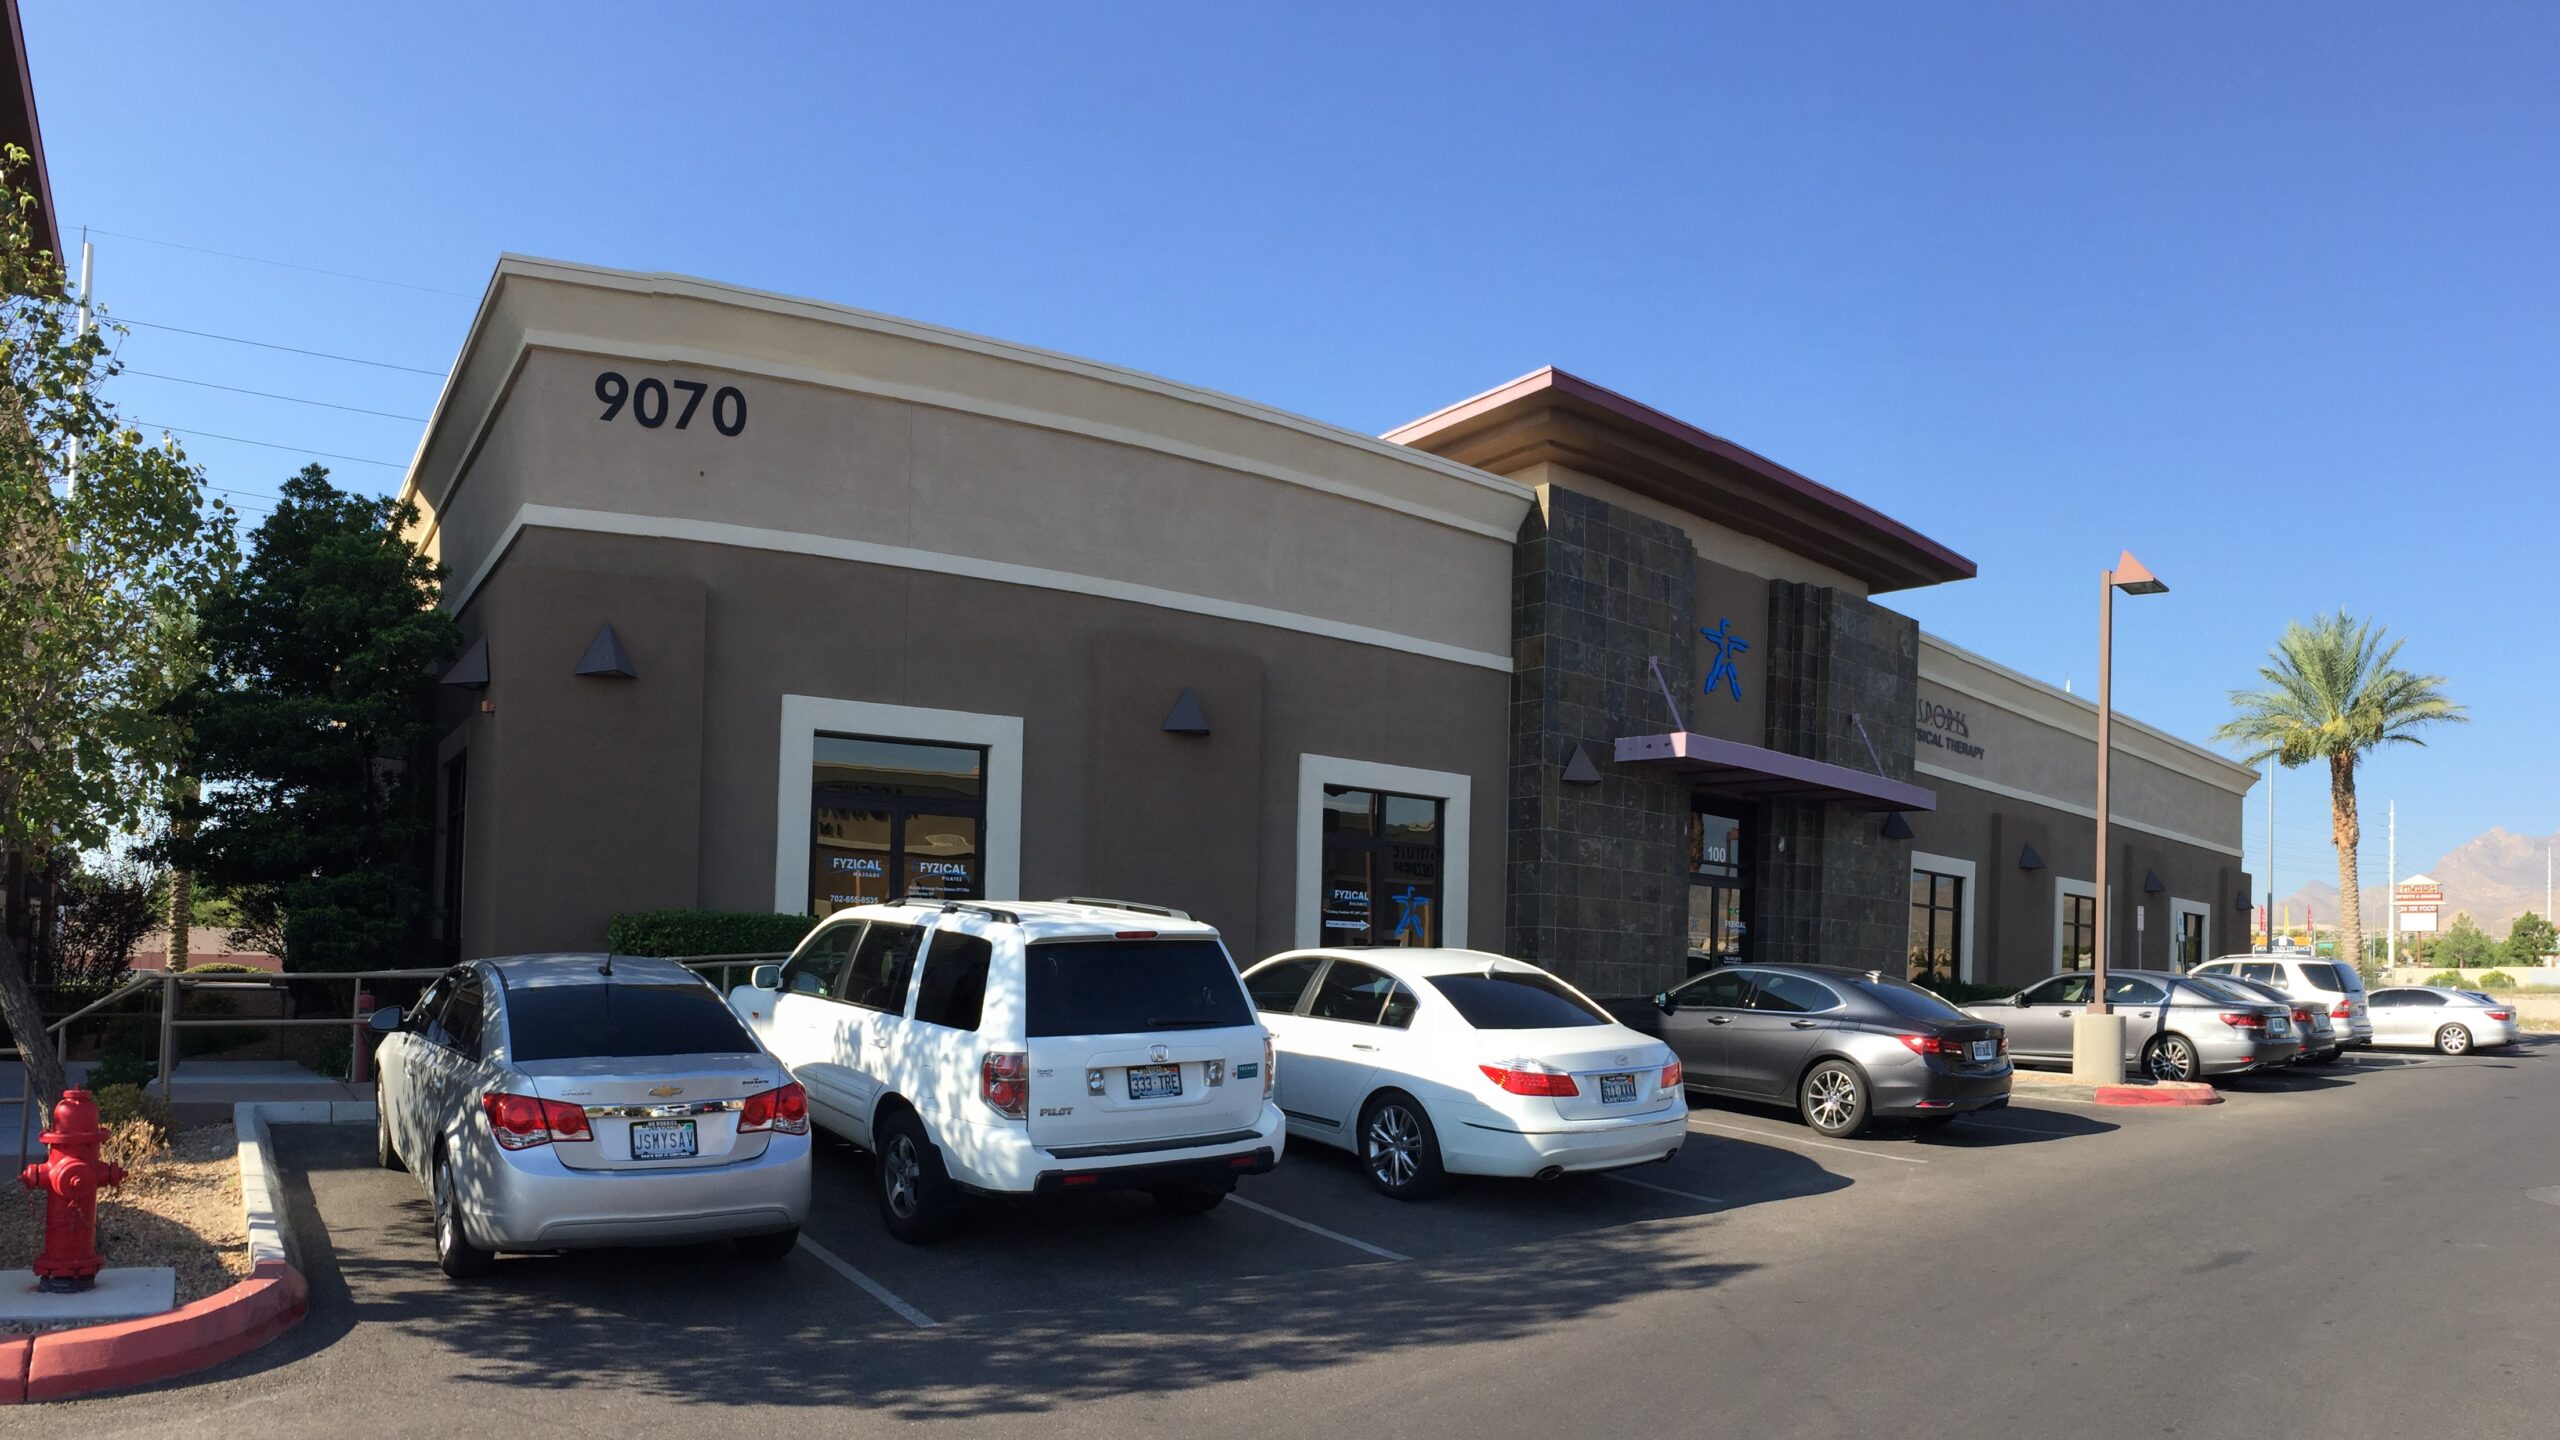 Brown building with tile accent sold as Las Vegas commercial real estate